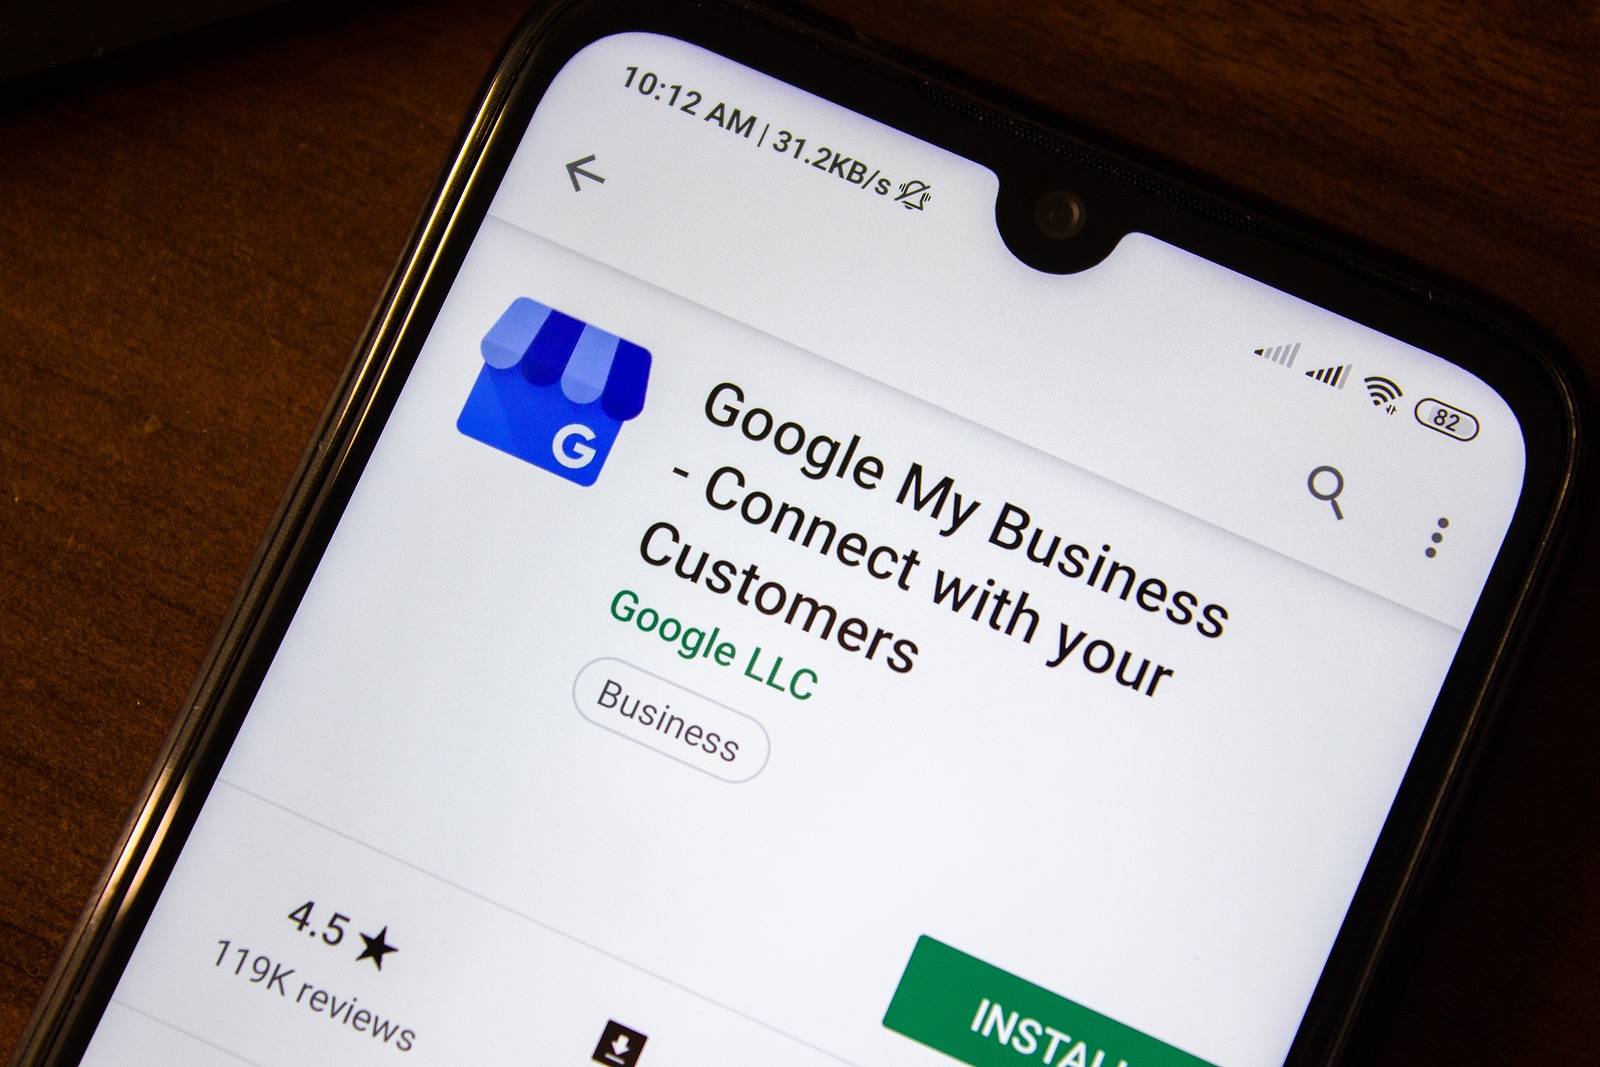 Picture of connect google my business app. Trying some non-techy SEO tips and tricks can be easy. seo for online counseling pages doesn't have to be a hassle. Get an SEO jumpstart today by connecting your business to google.